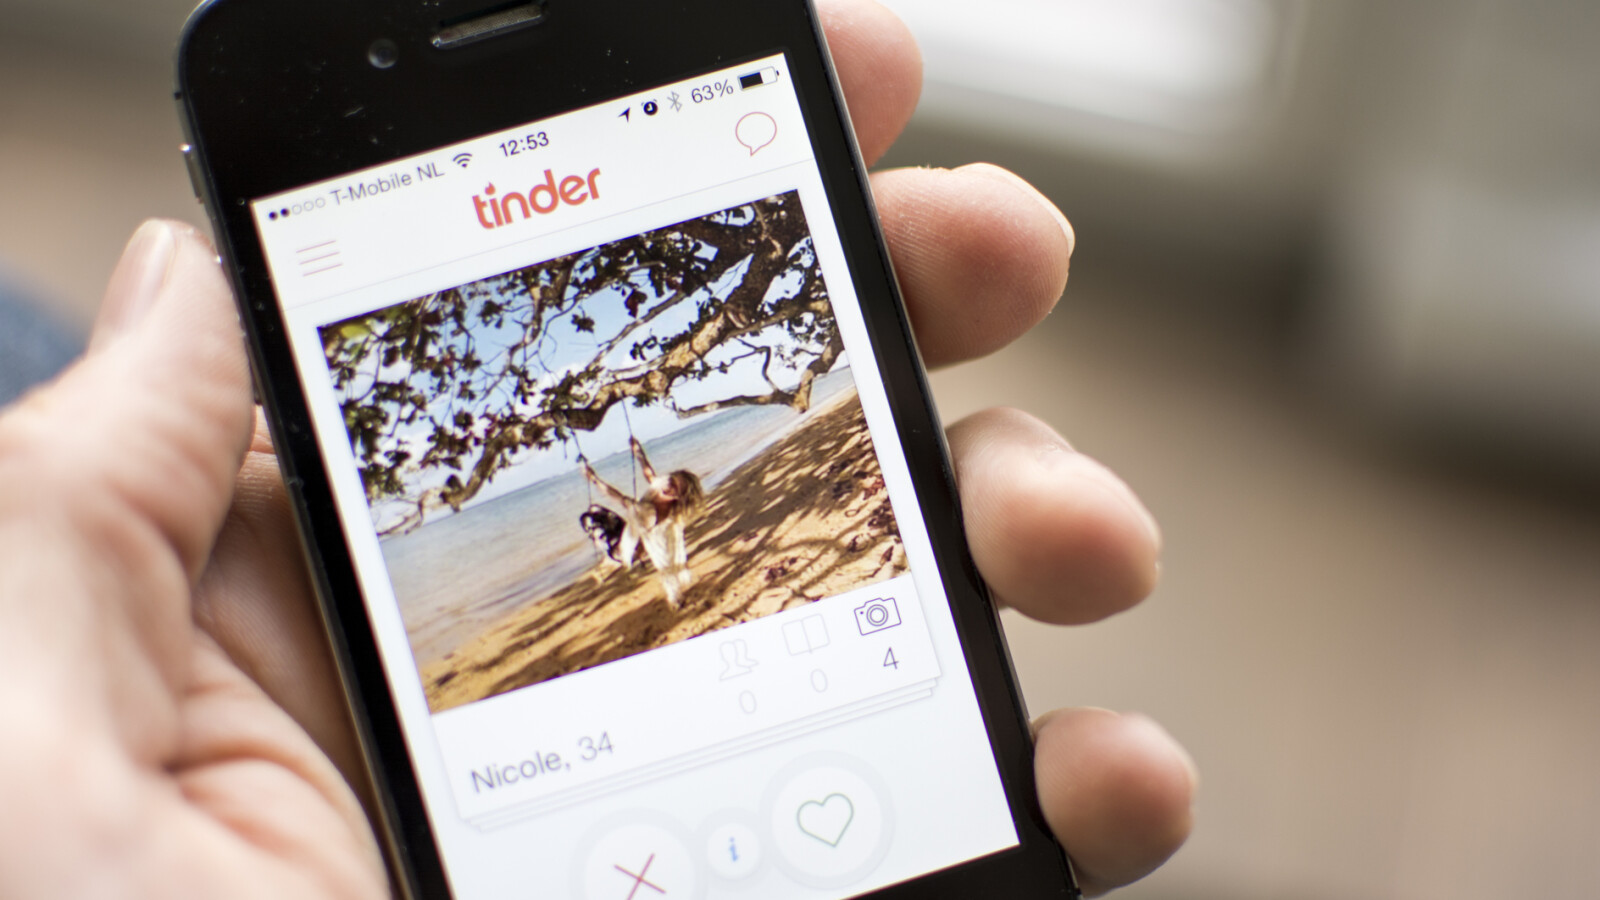 With tinder, the world's most popular free dating app, you have millio...